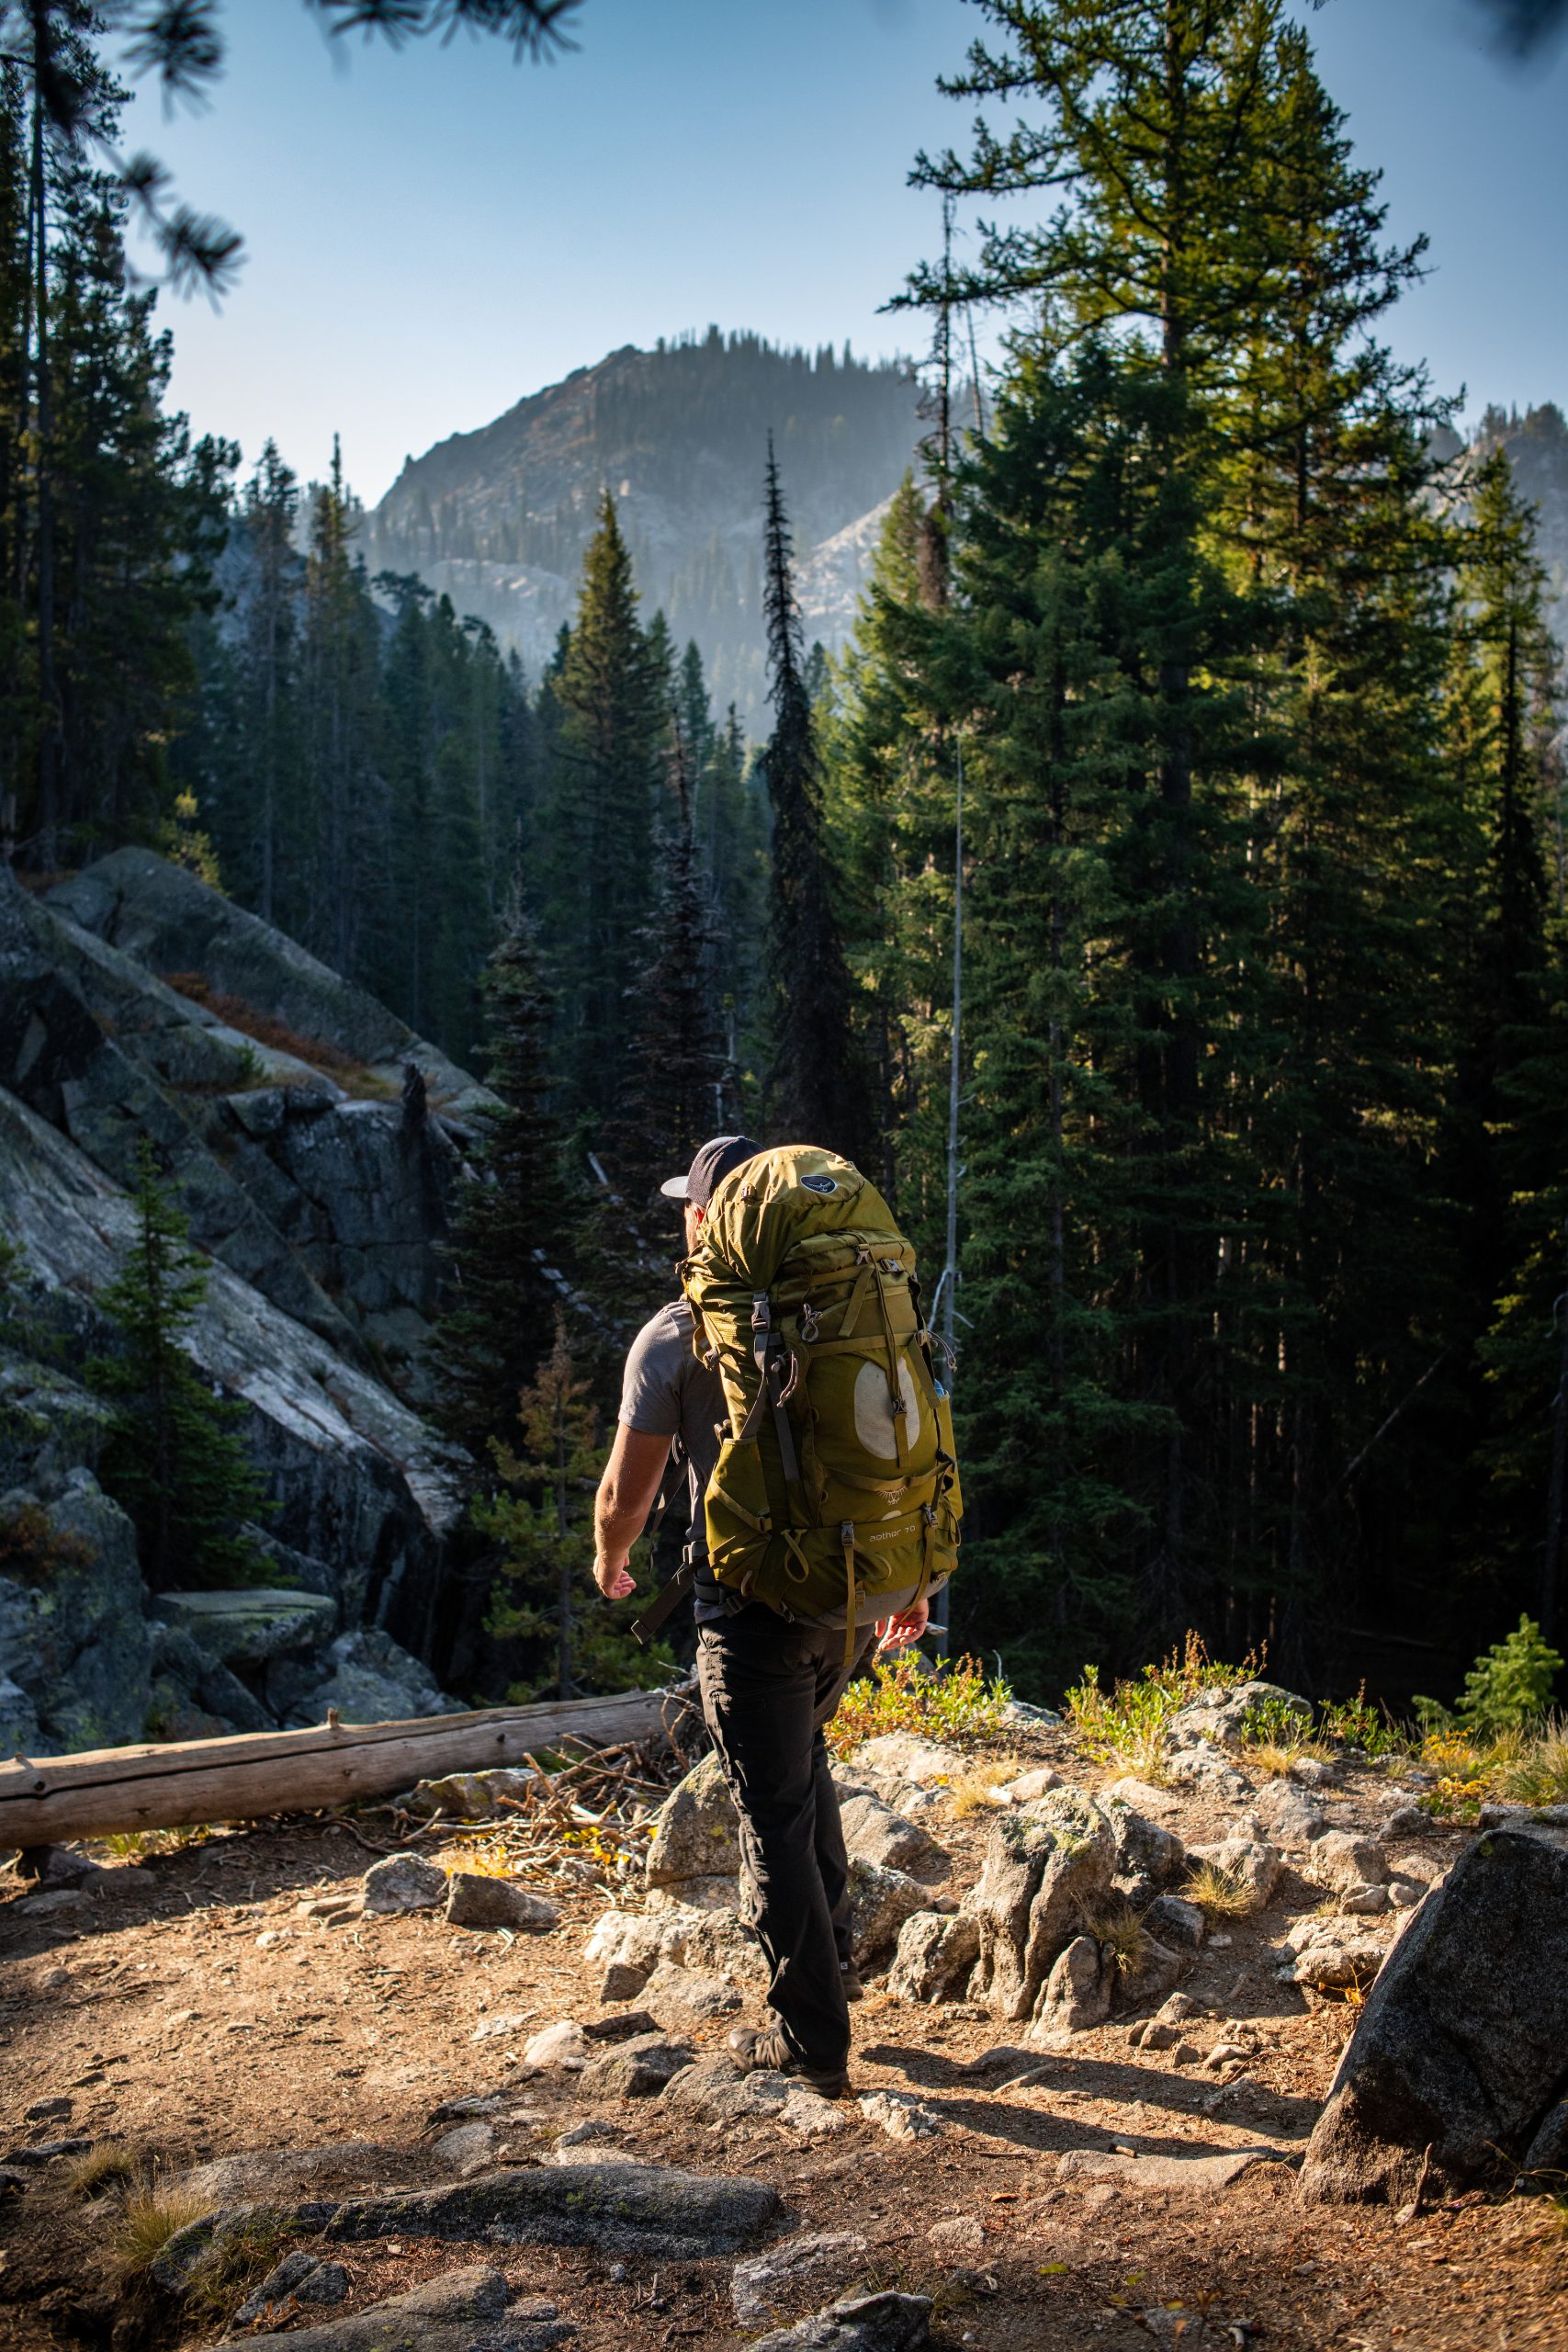 A person with a backpack standing on rocky dirt trail overlooking a forest of tall trees.